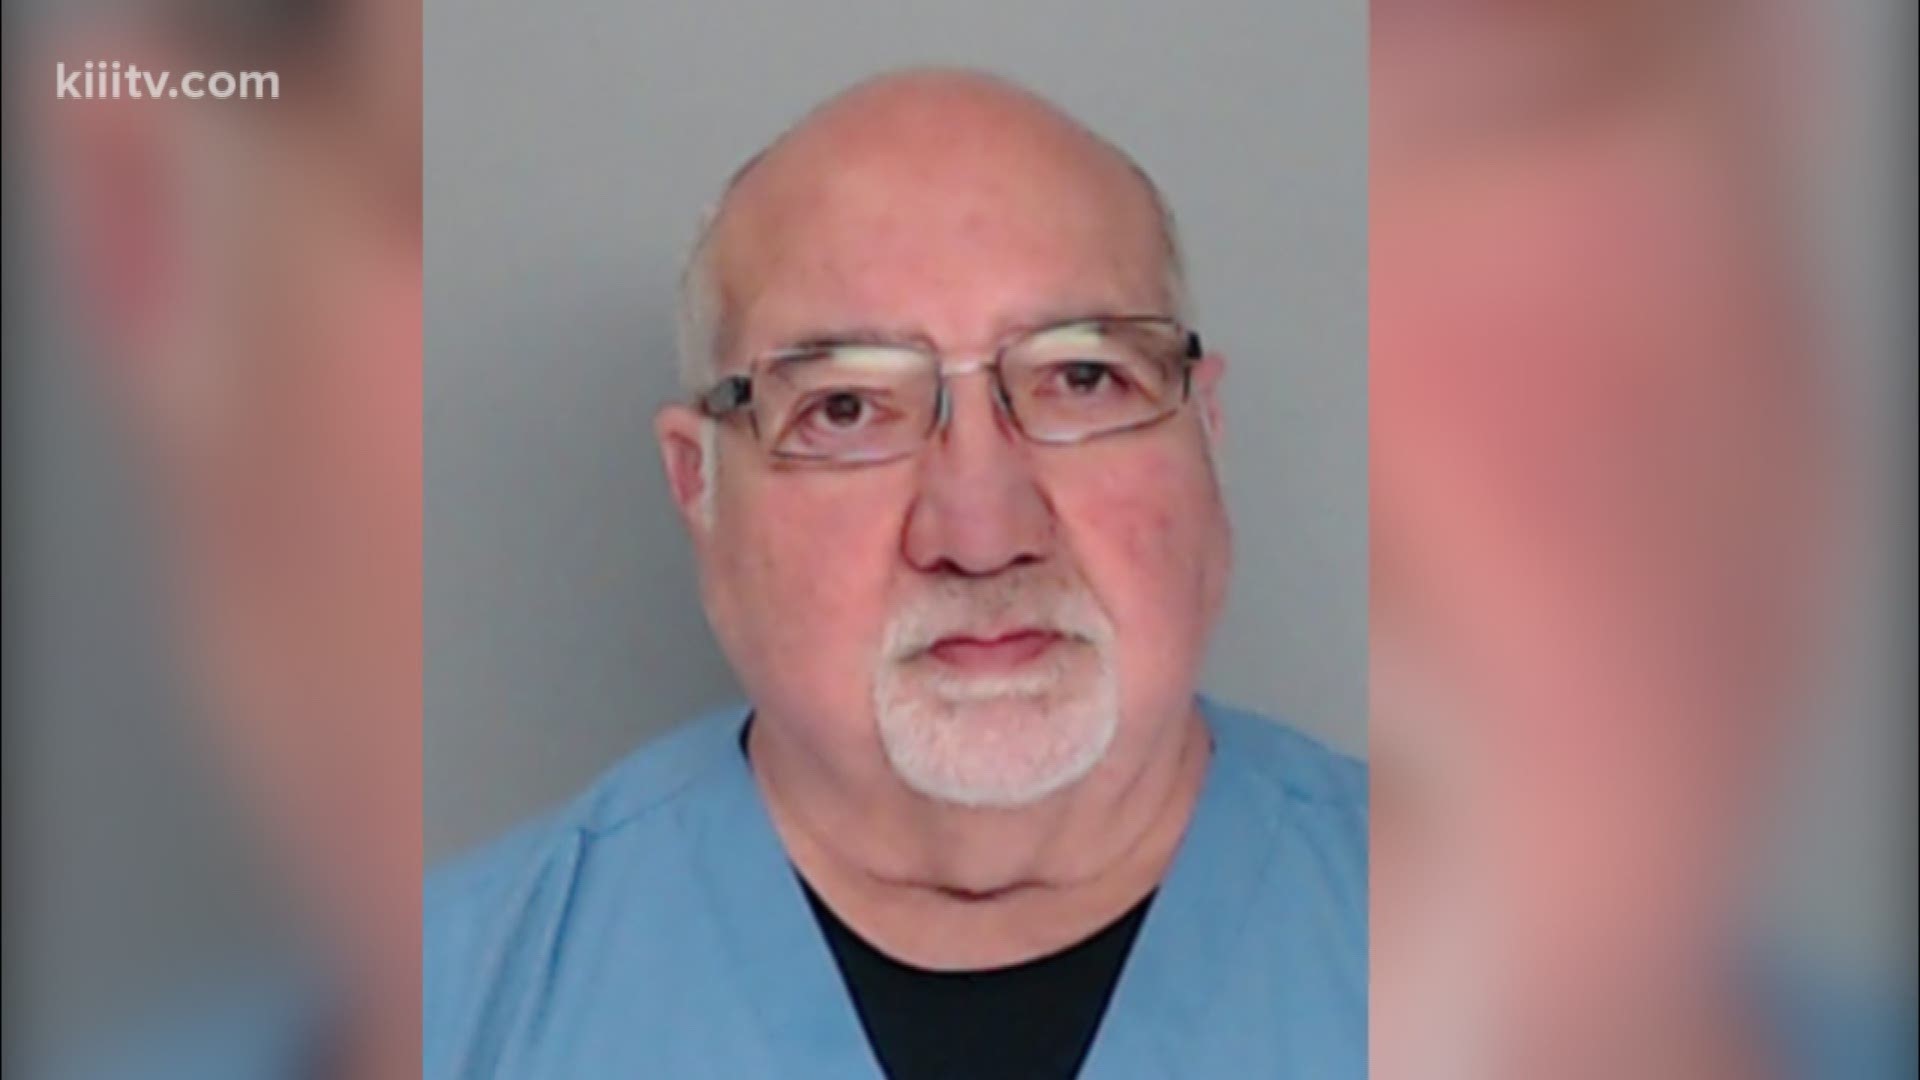 The Texas Medical Board has temporarily suspended the medical license of a Coastal Bend OBGYN doctor who has been indicted on charges of felony sexual assault.